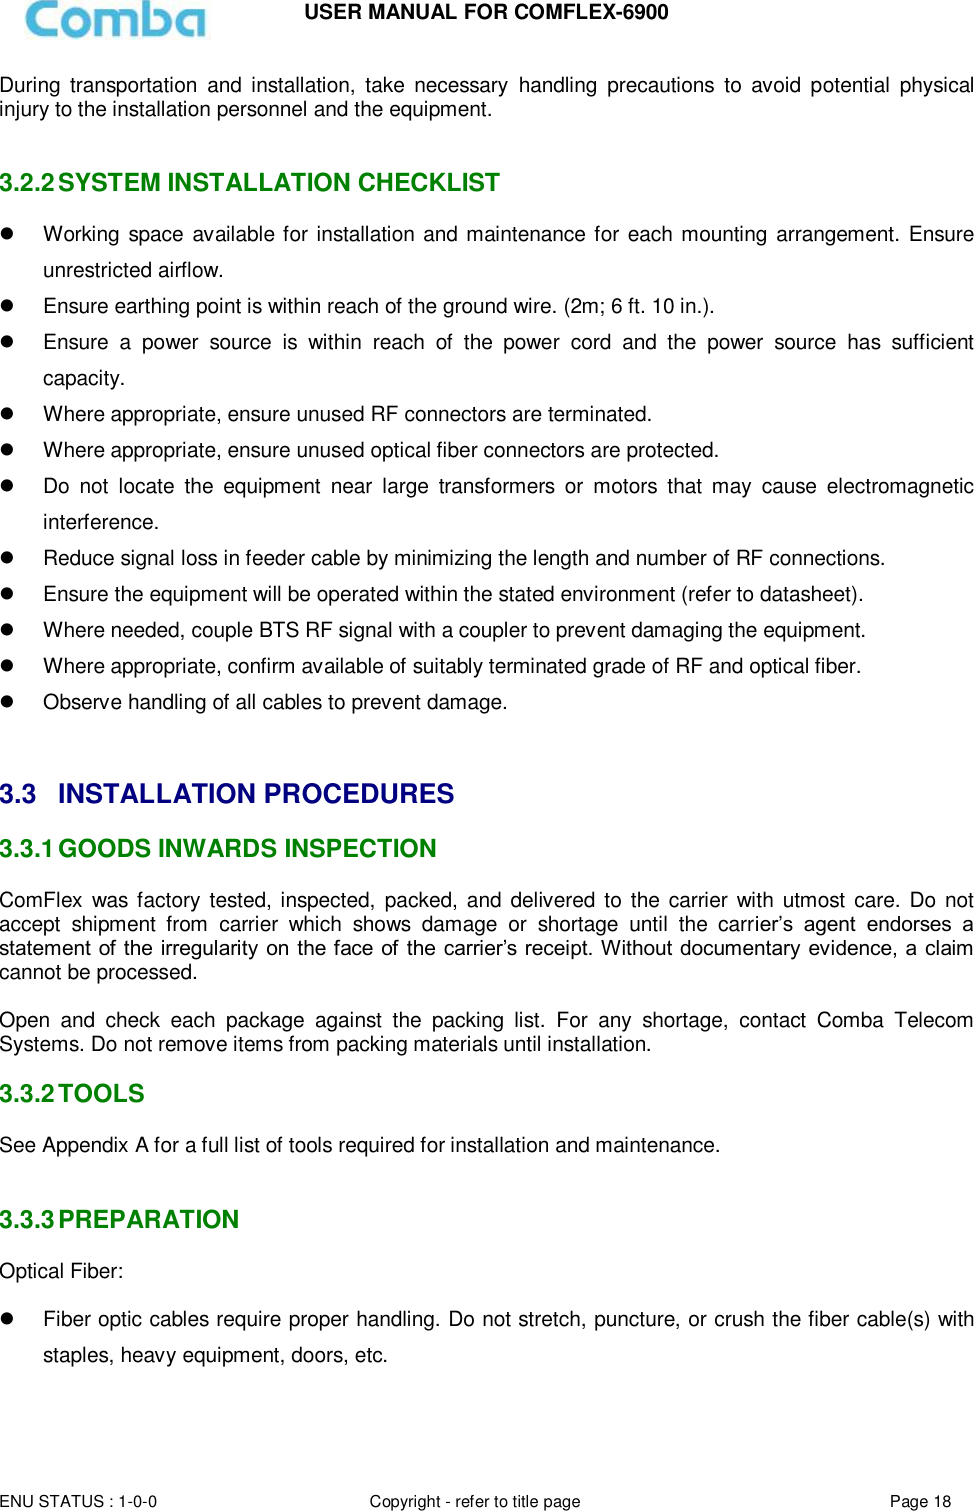 Page 18 of Comba Telecom COMFLEX-6900 ComFlex Series Distributed Antenna System User Manual 